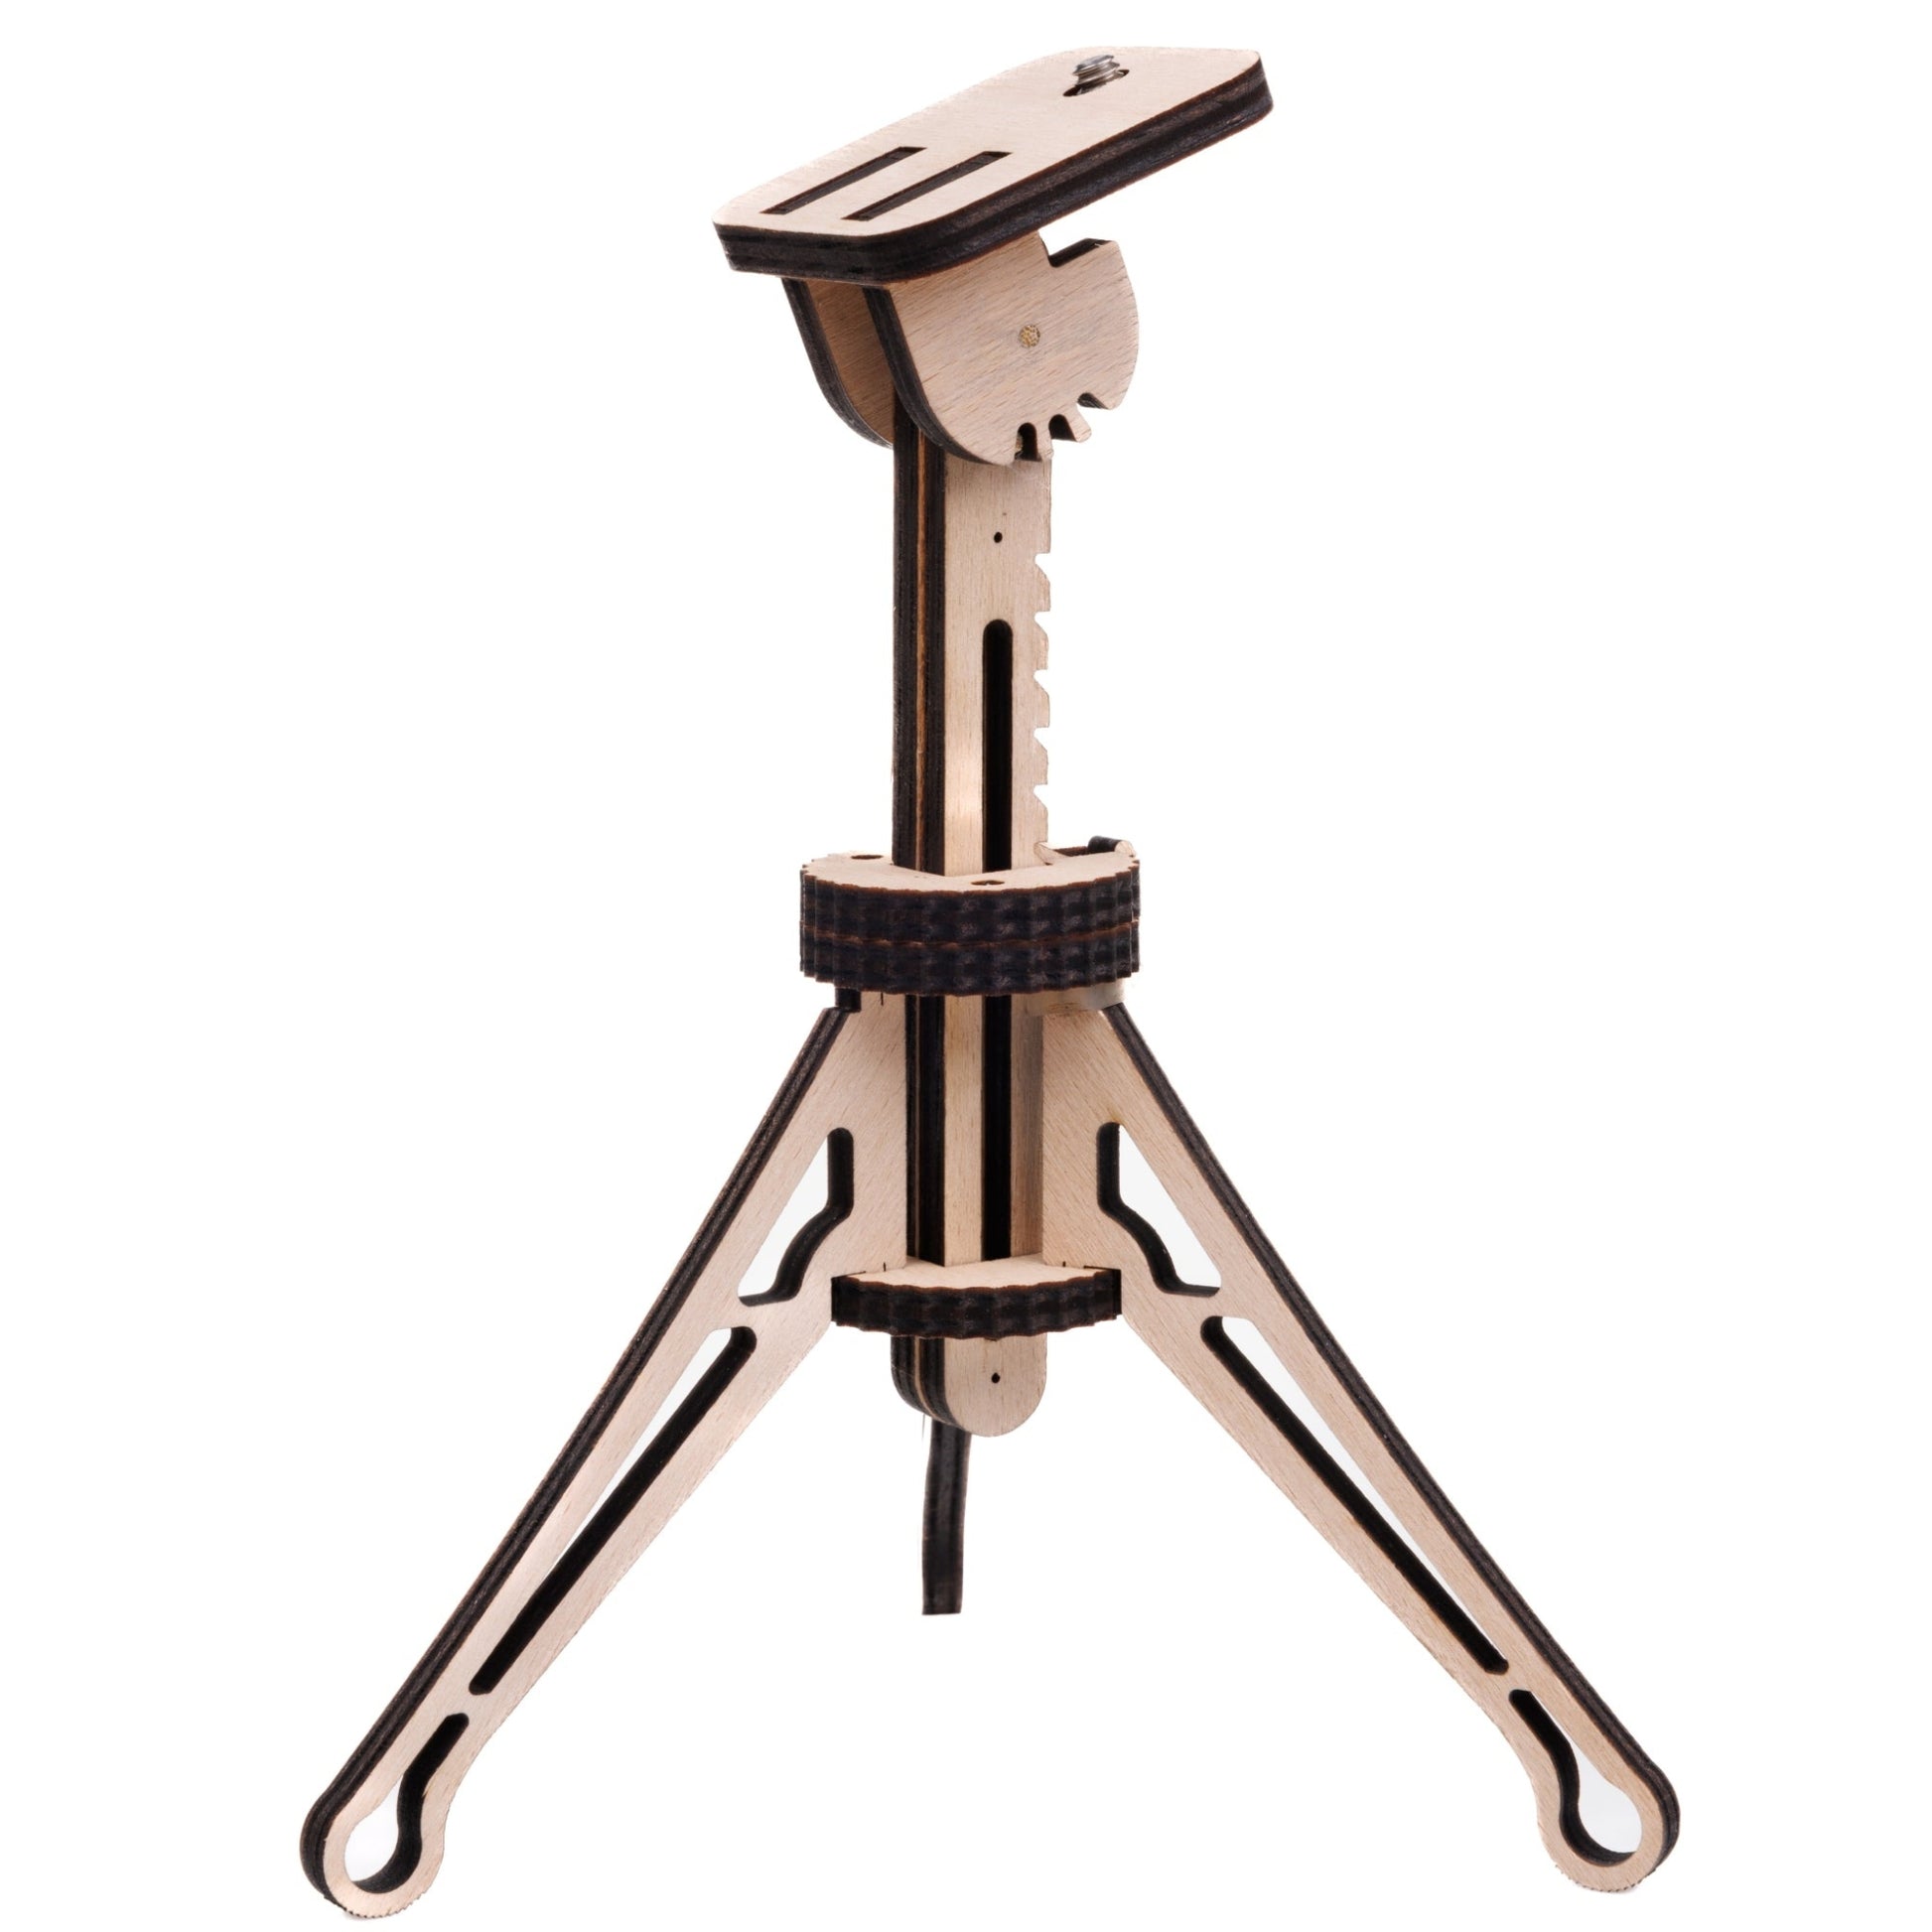 A Decorative DIY Natural Wood plywood tripod kit for self-assembly. Works with any Jollylook instant film camera.